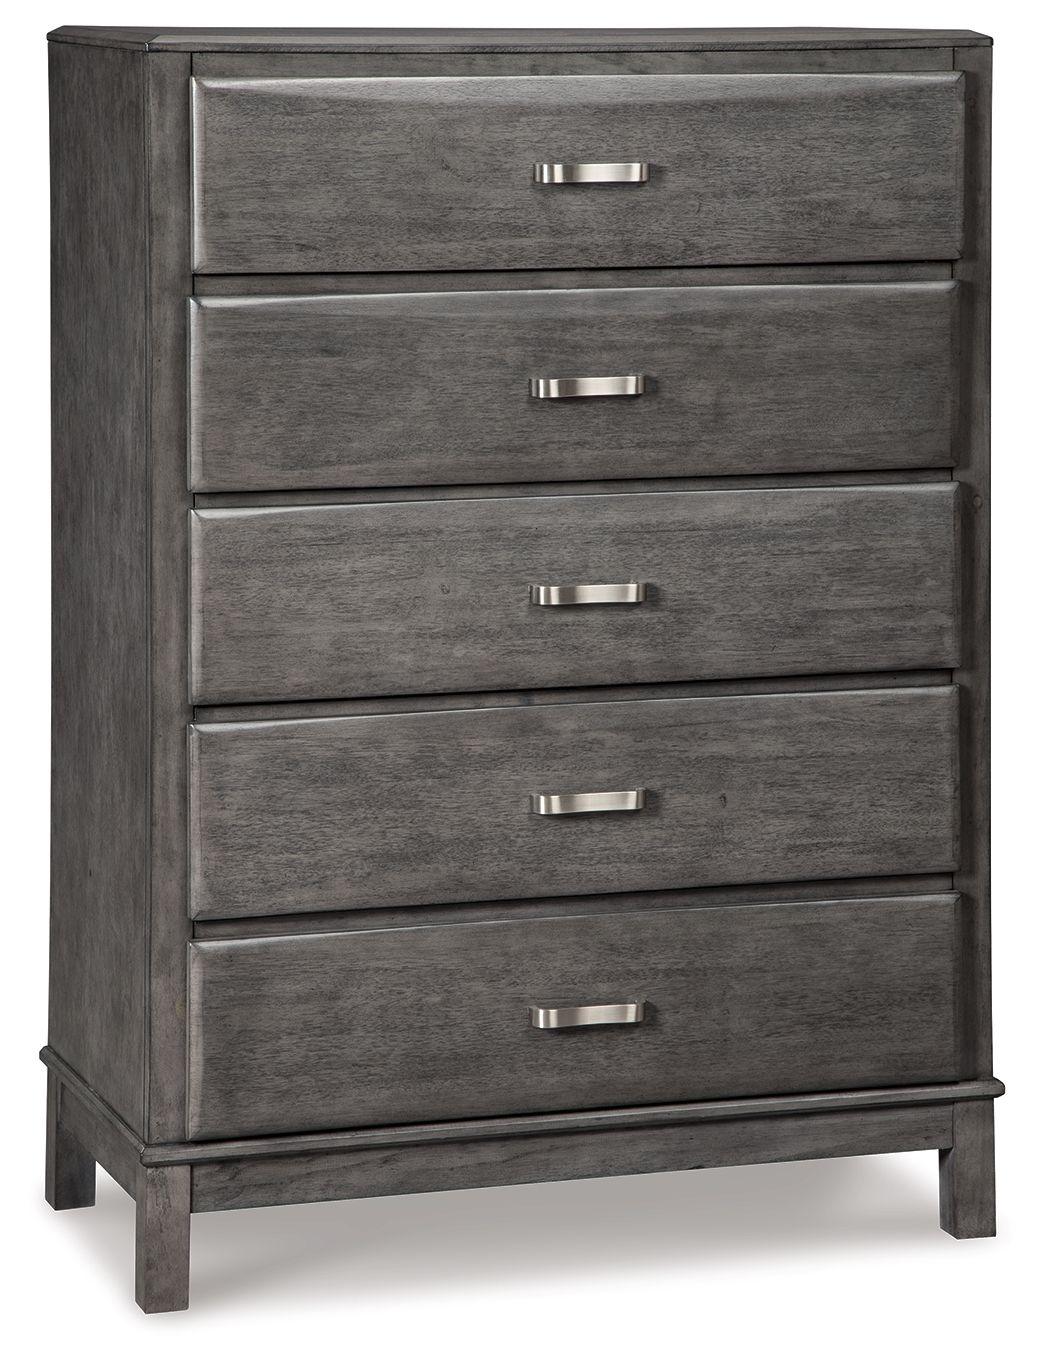 Ashley Furniture - Caitbrook - Gray - Five Drawer Chest - 5th Avenue Furniture